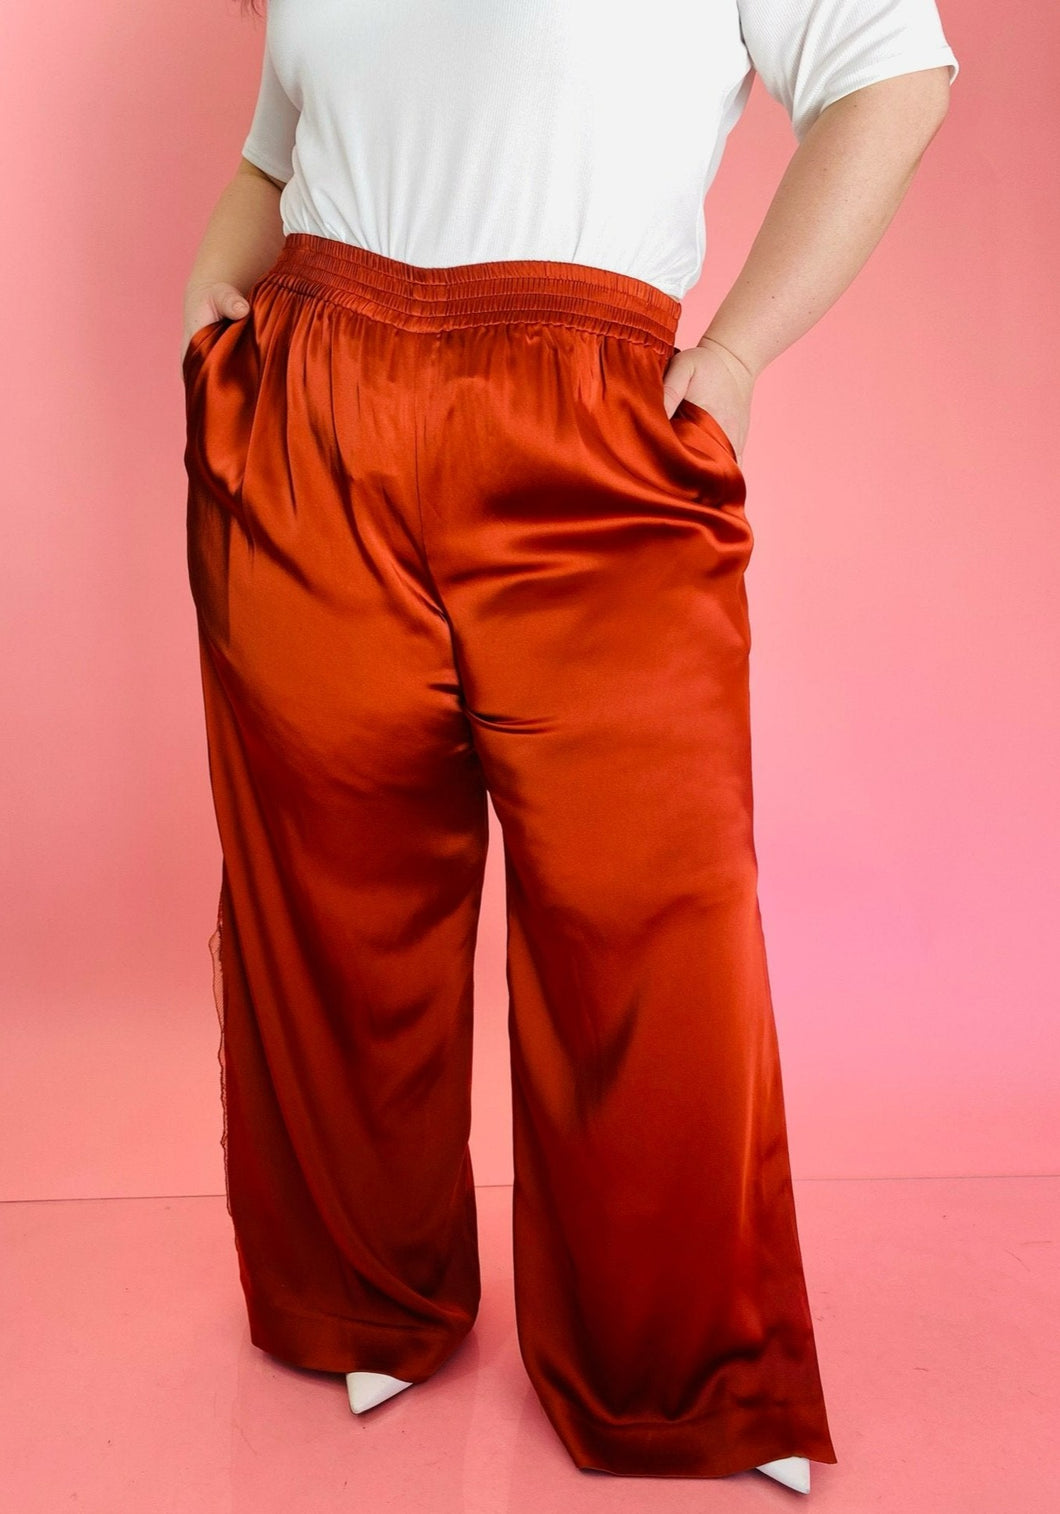 Front view of a pair of size 16 Jonathan Simkhai rust-colored shiny, silky pants with an elastic waist, wide legs, and a lacy side slit detail styled with a white tee on a size 14/16 model.